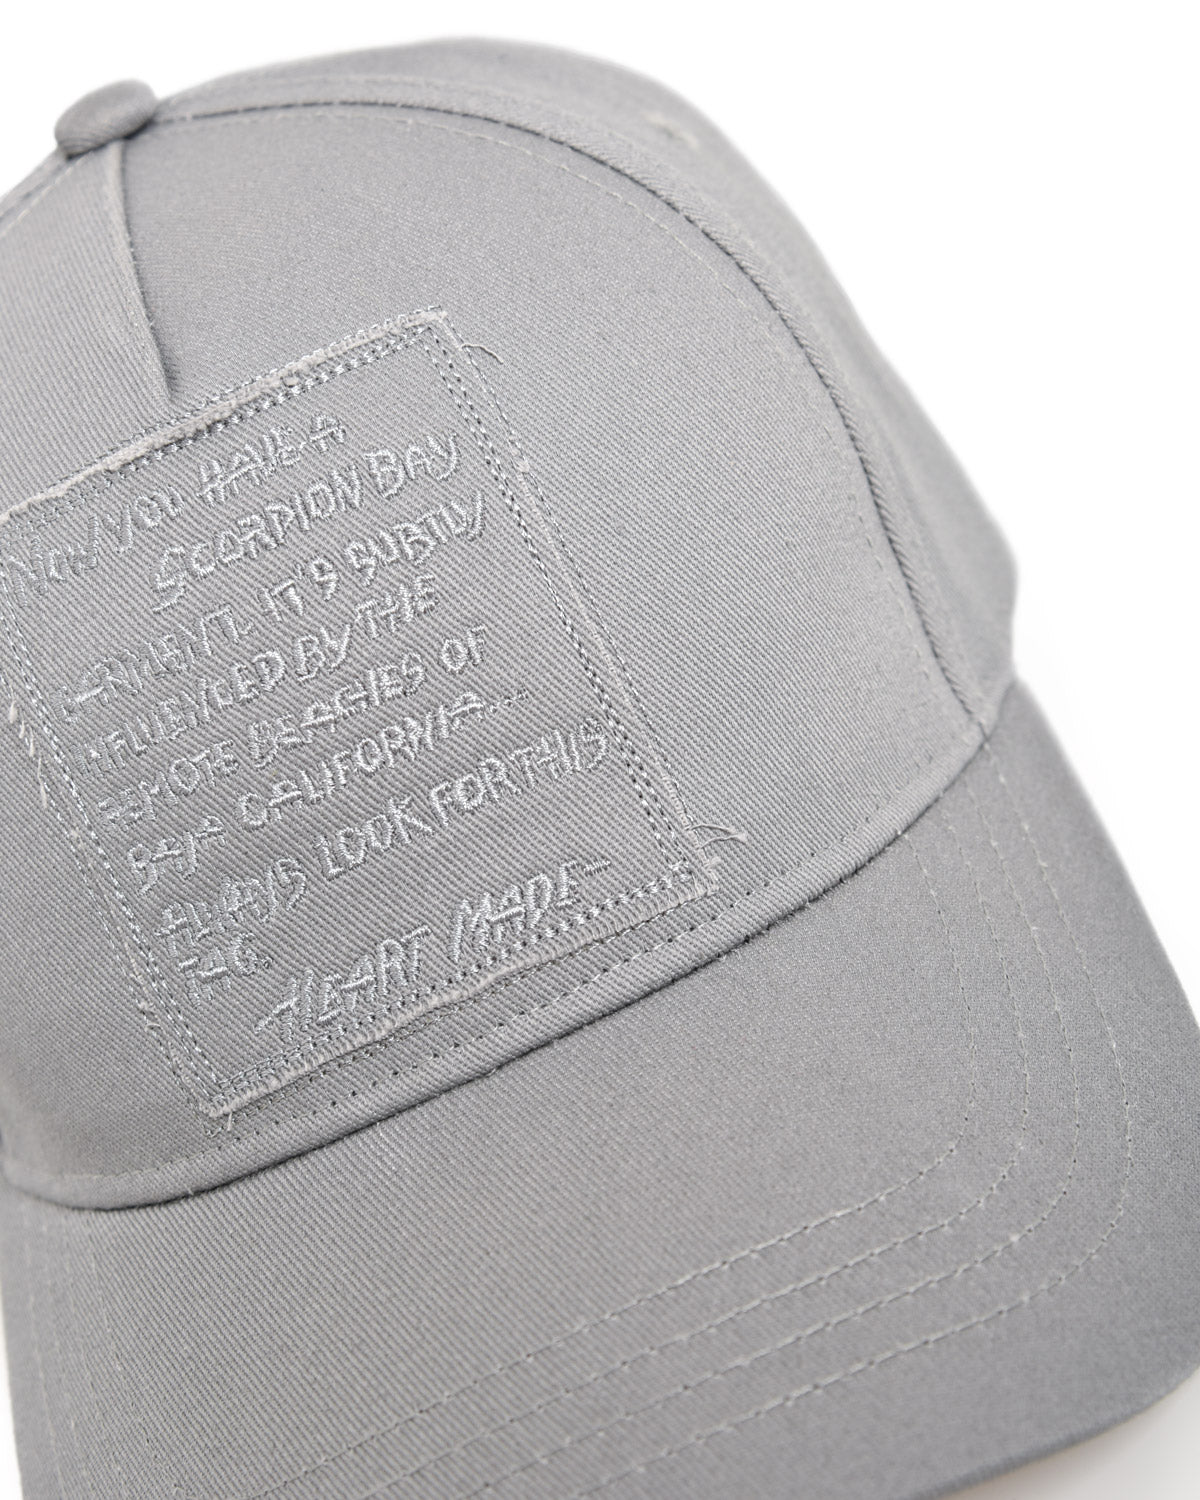 Anthracite-Coloured 100% Cotton Baseball Cap With Embroidered Vanlife Label